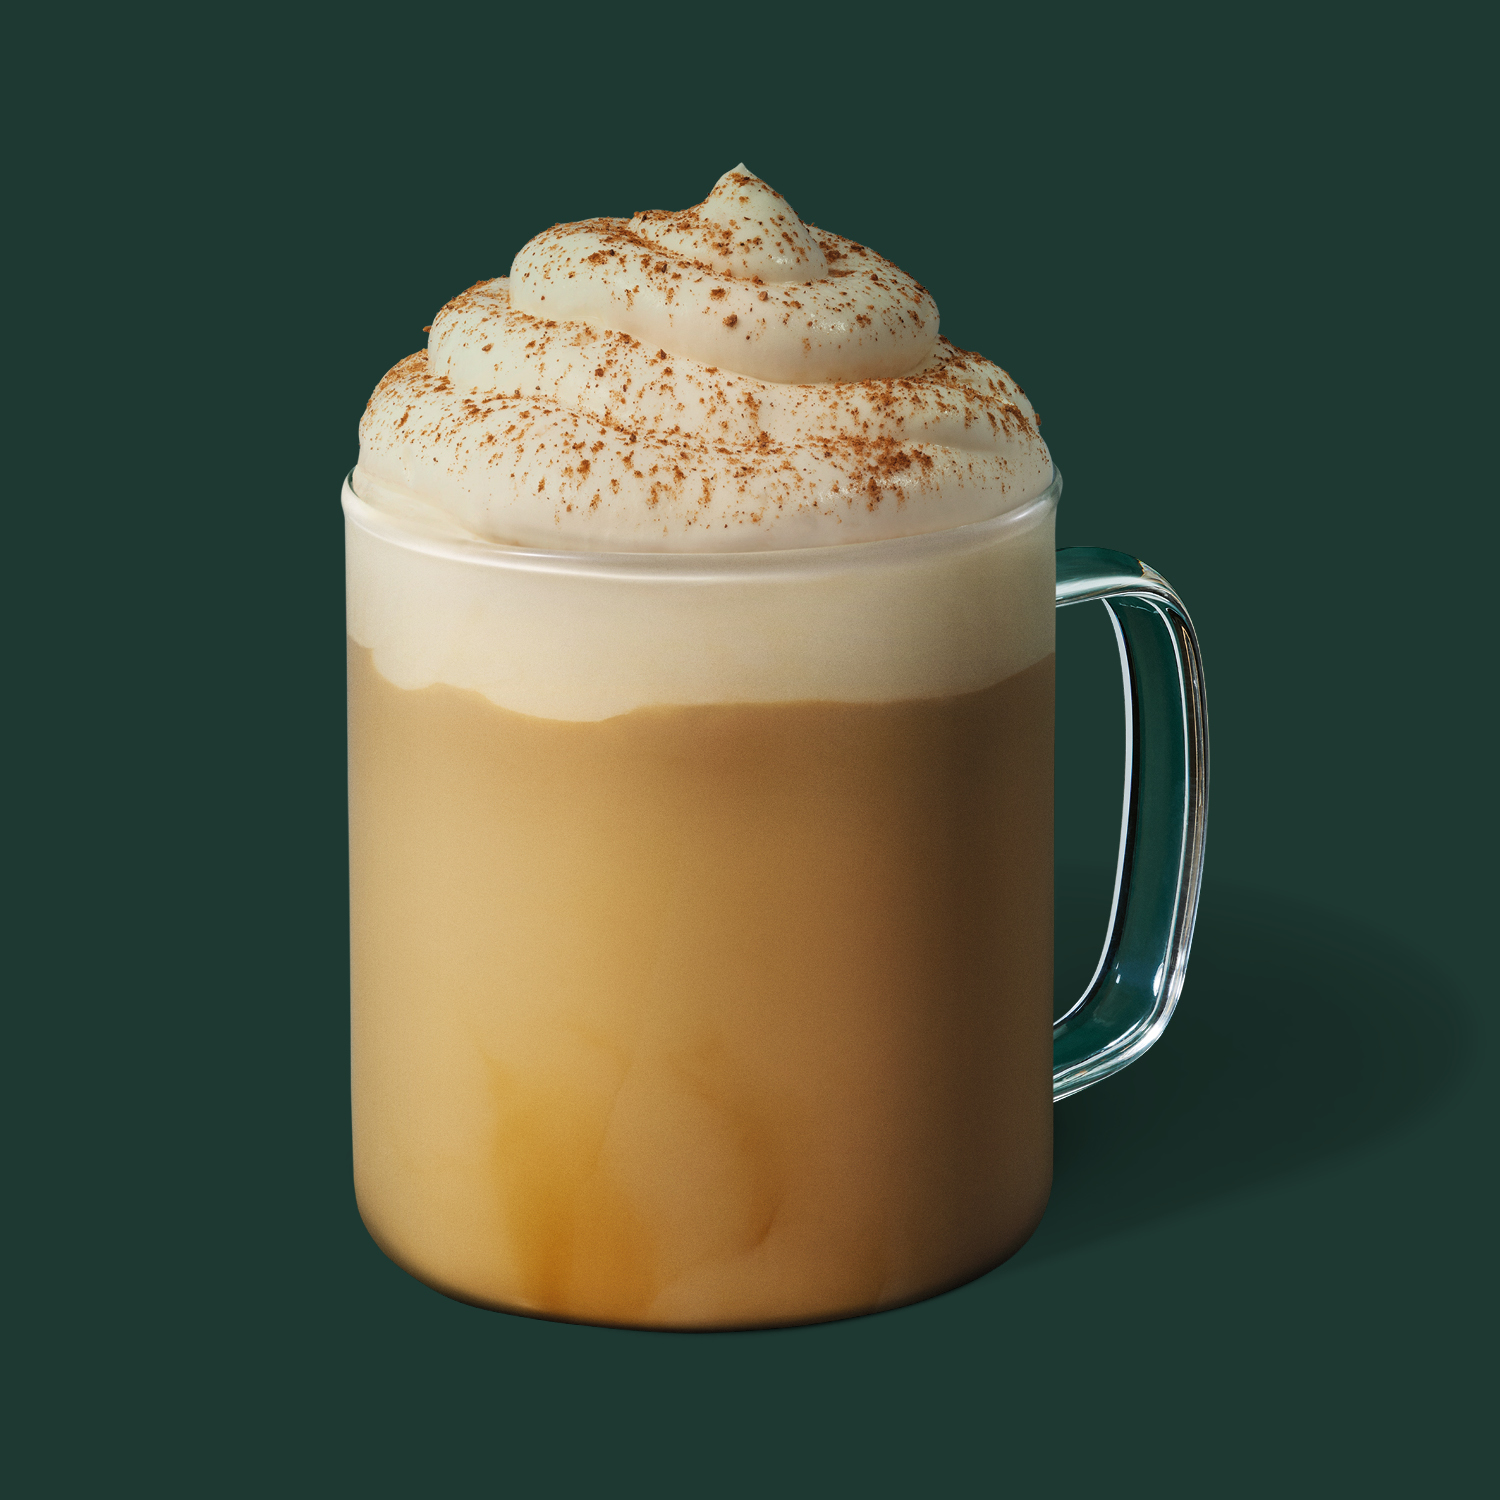 Does Starbucks Have The Gingerbread Latte